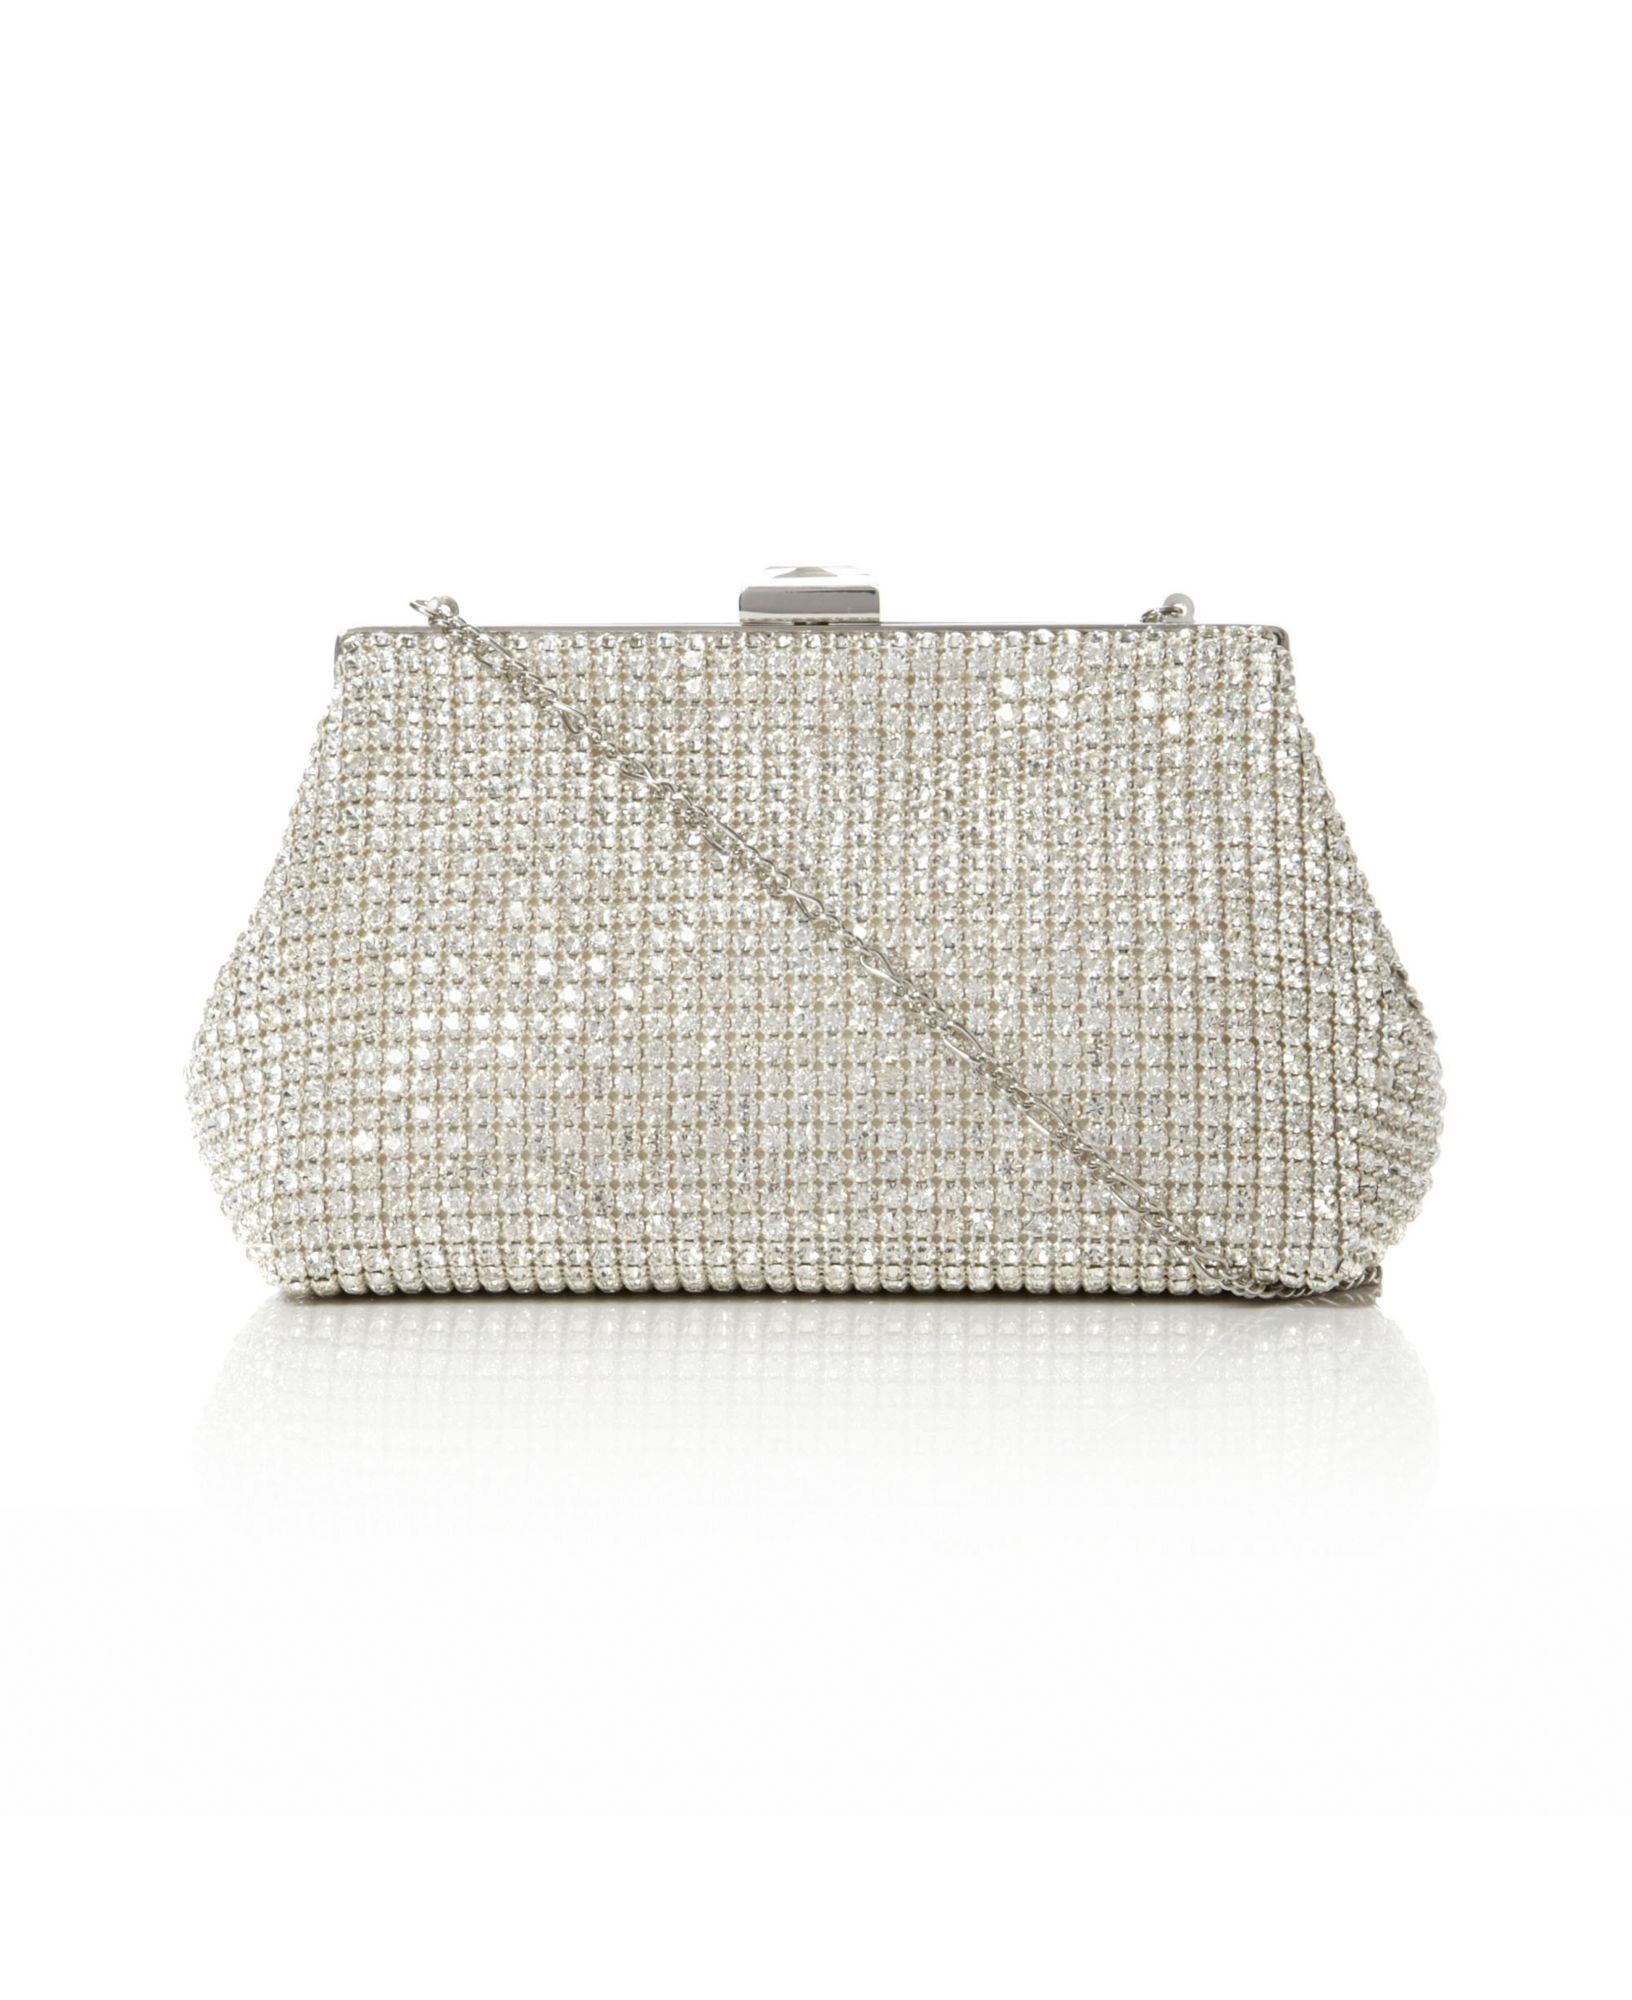 Dune Mling Diamante Crystal Clasp Clutch Bag in Silver | Lyst